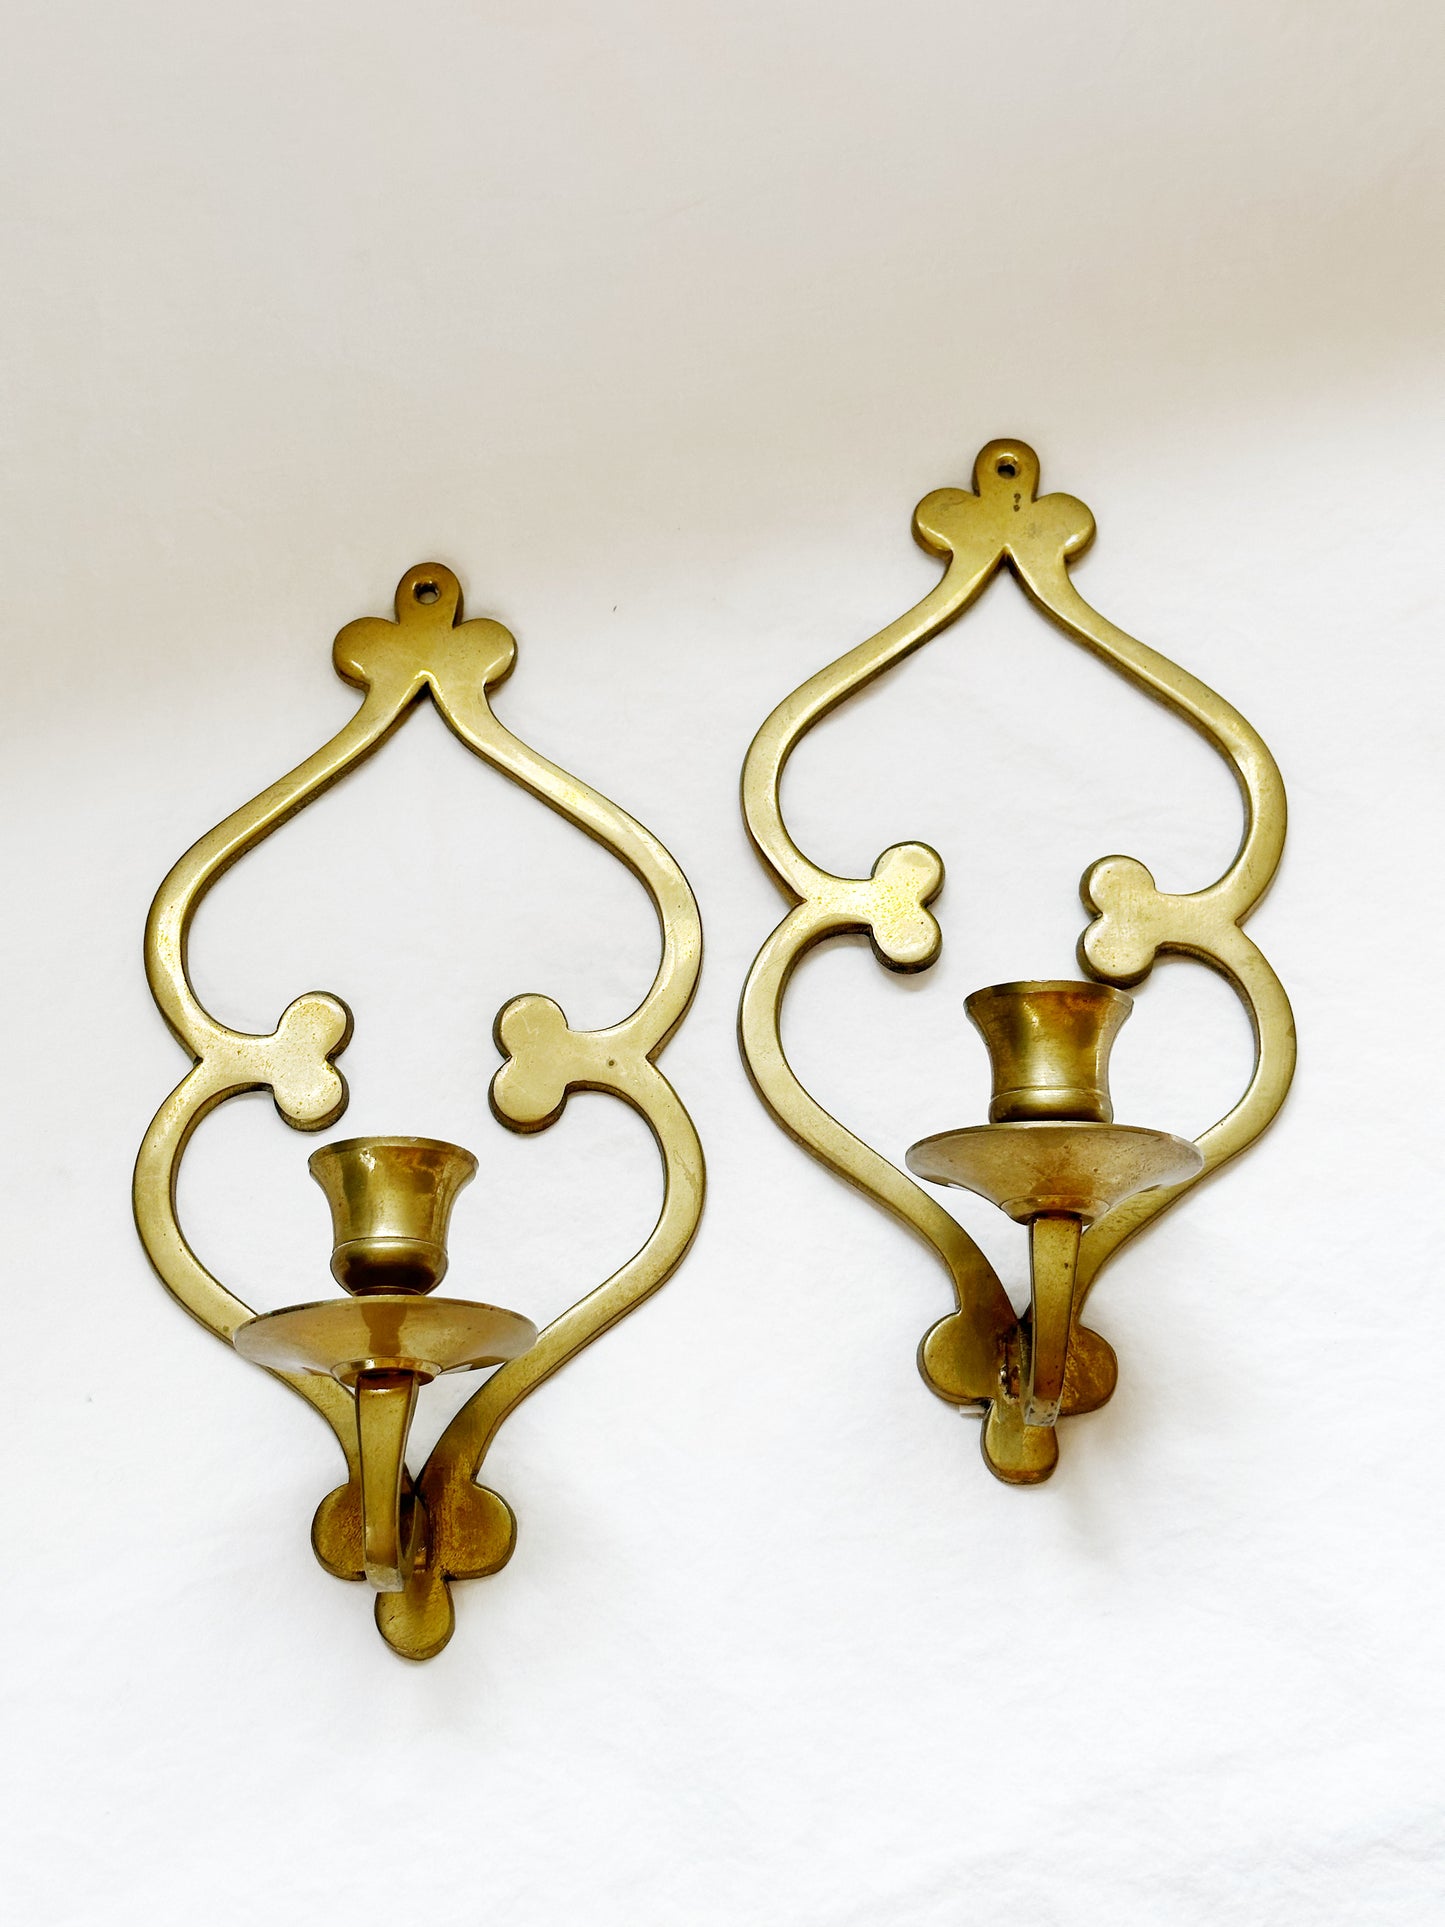 Brass Wall Sconces